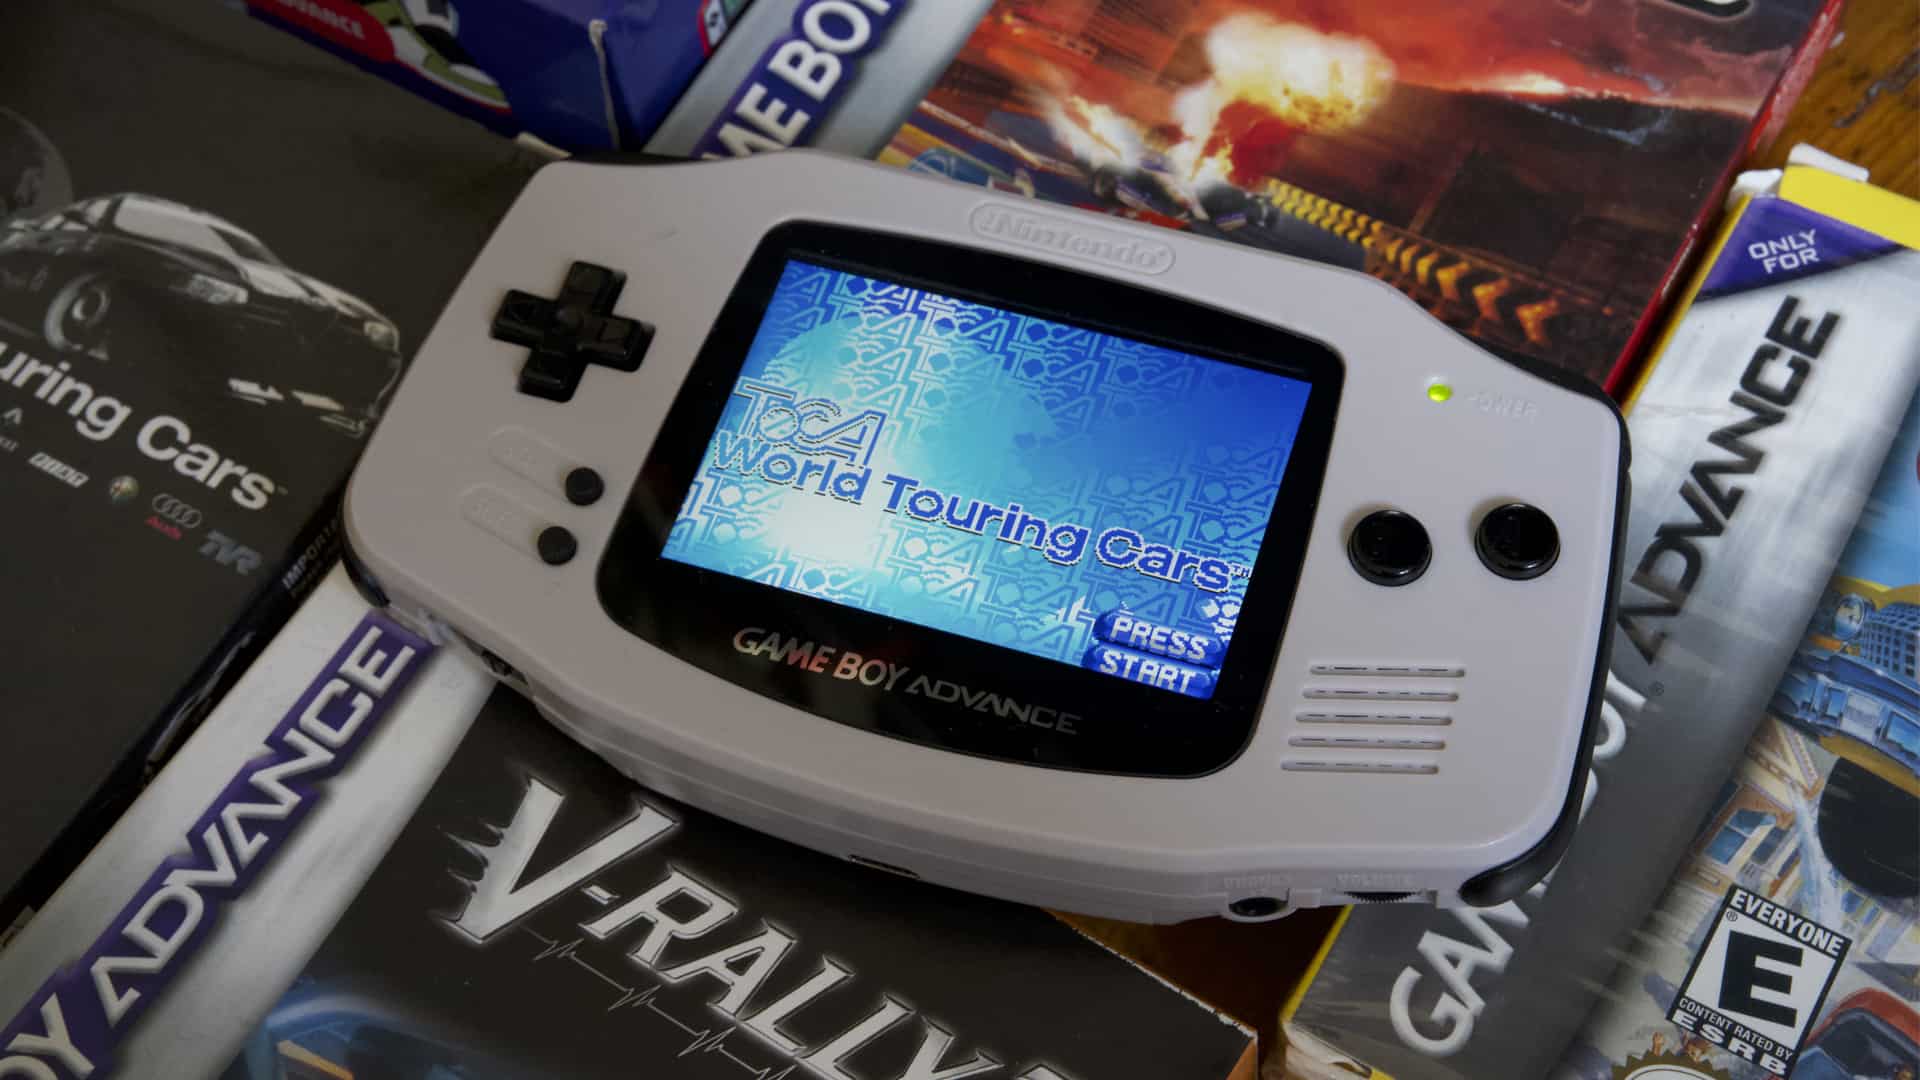 The best racing games on Game Boy Advance